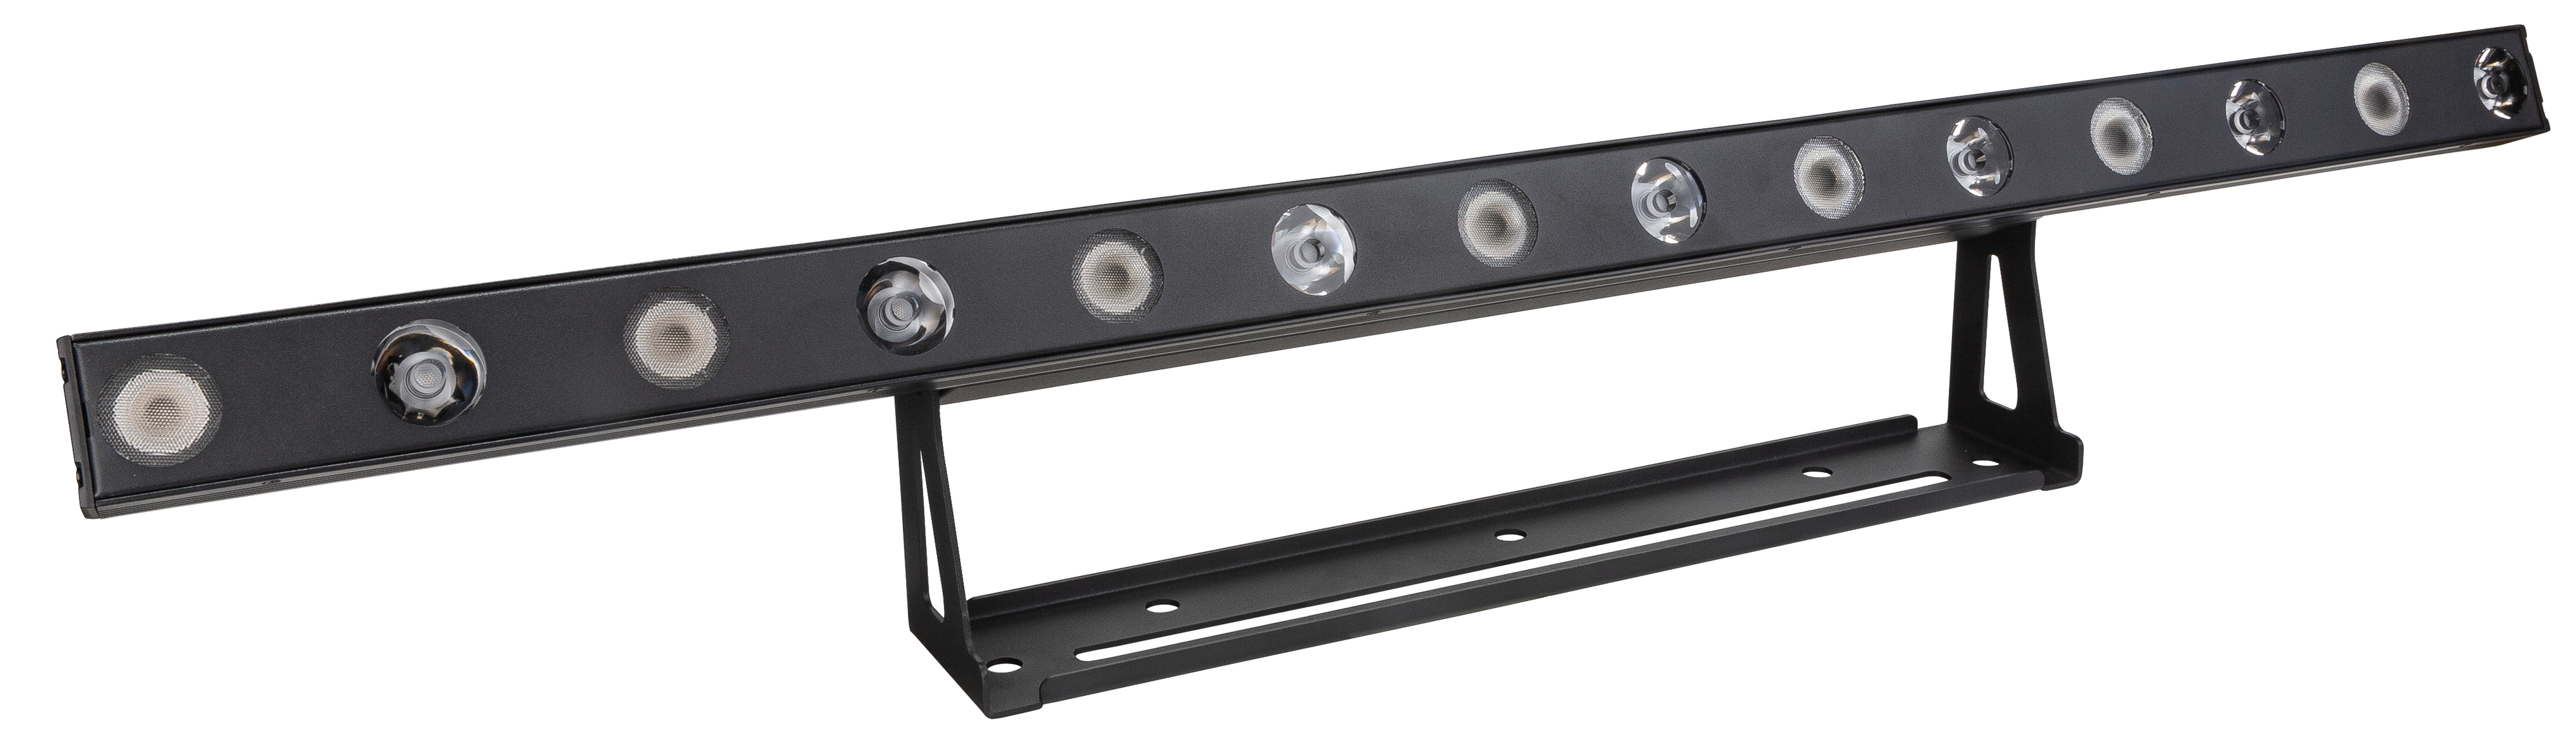 This 2in1 light bar combines narrow white beams and wide color beams in one single unit!